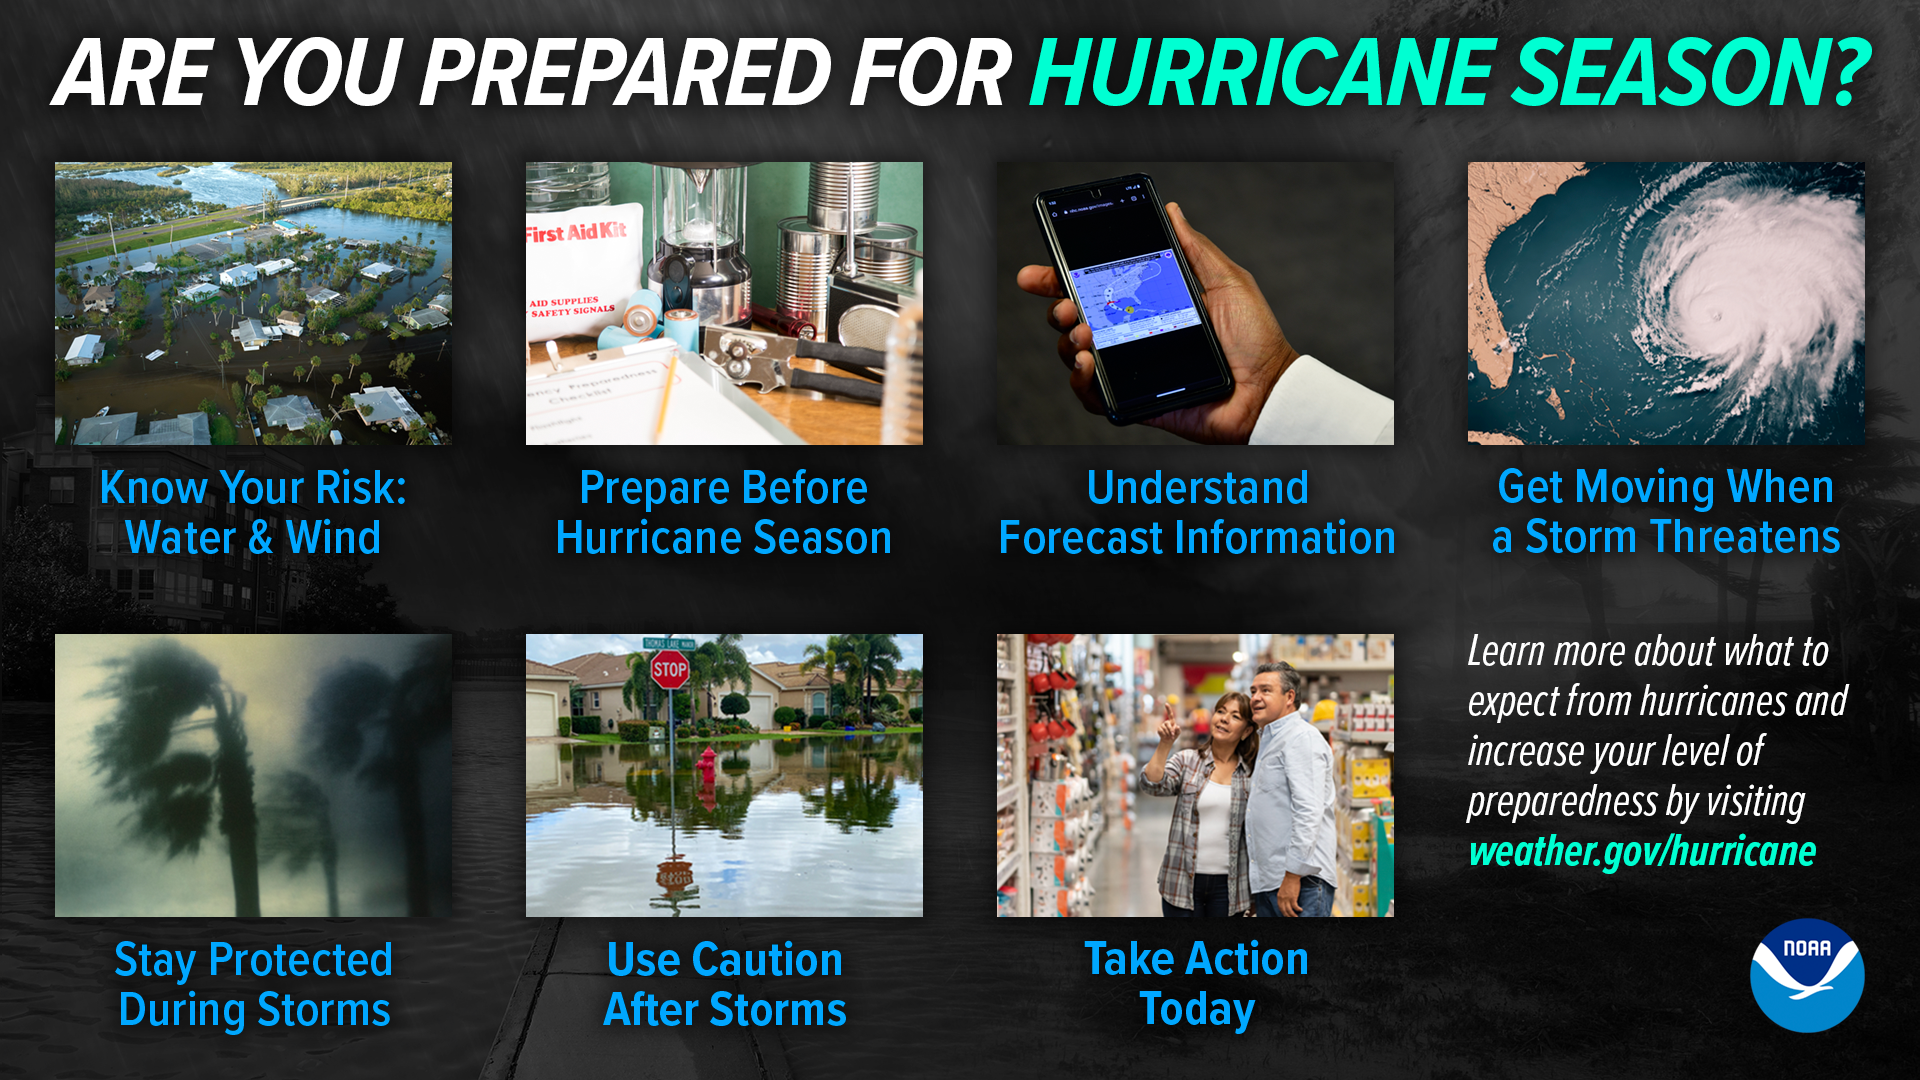 When Does Hurricane Season Start in Florida? Discover the Power Behind Staying Prepared